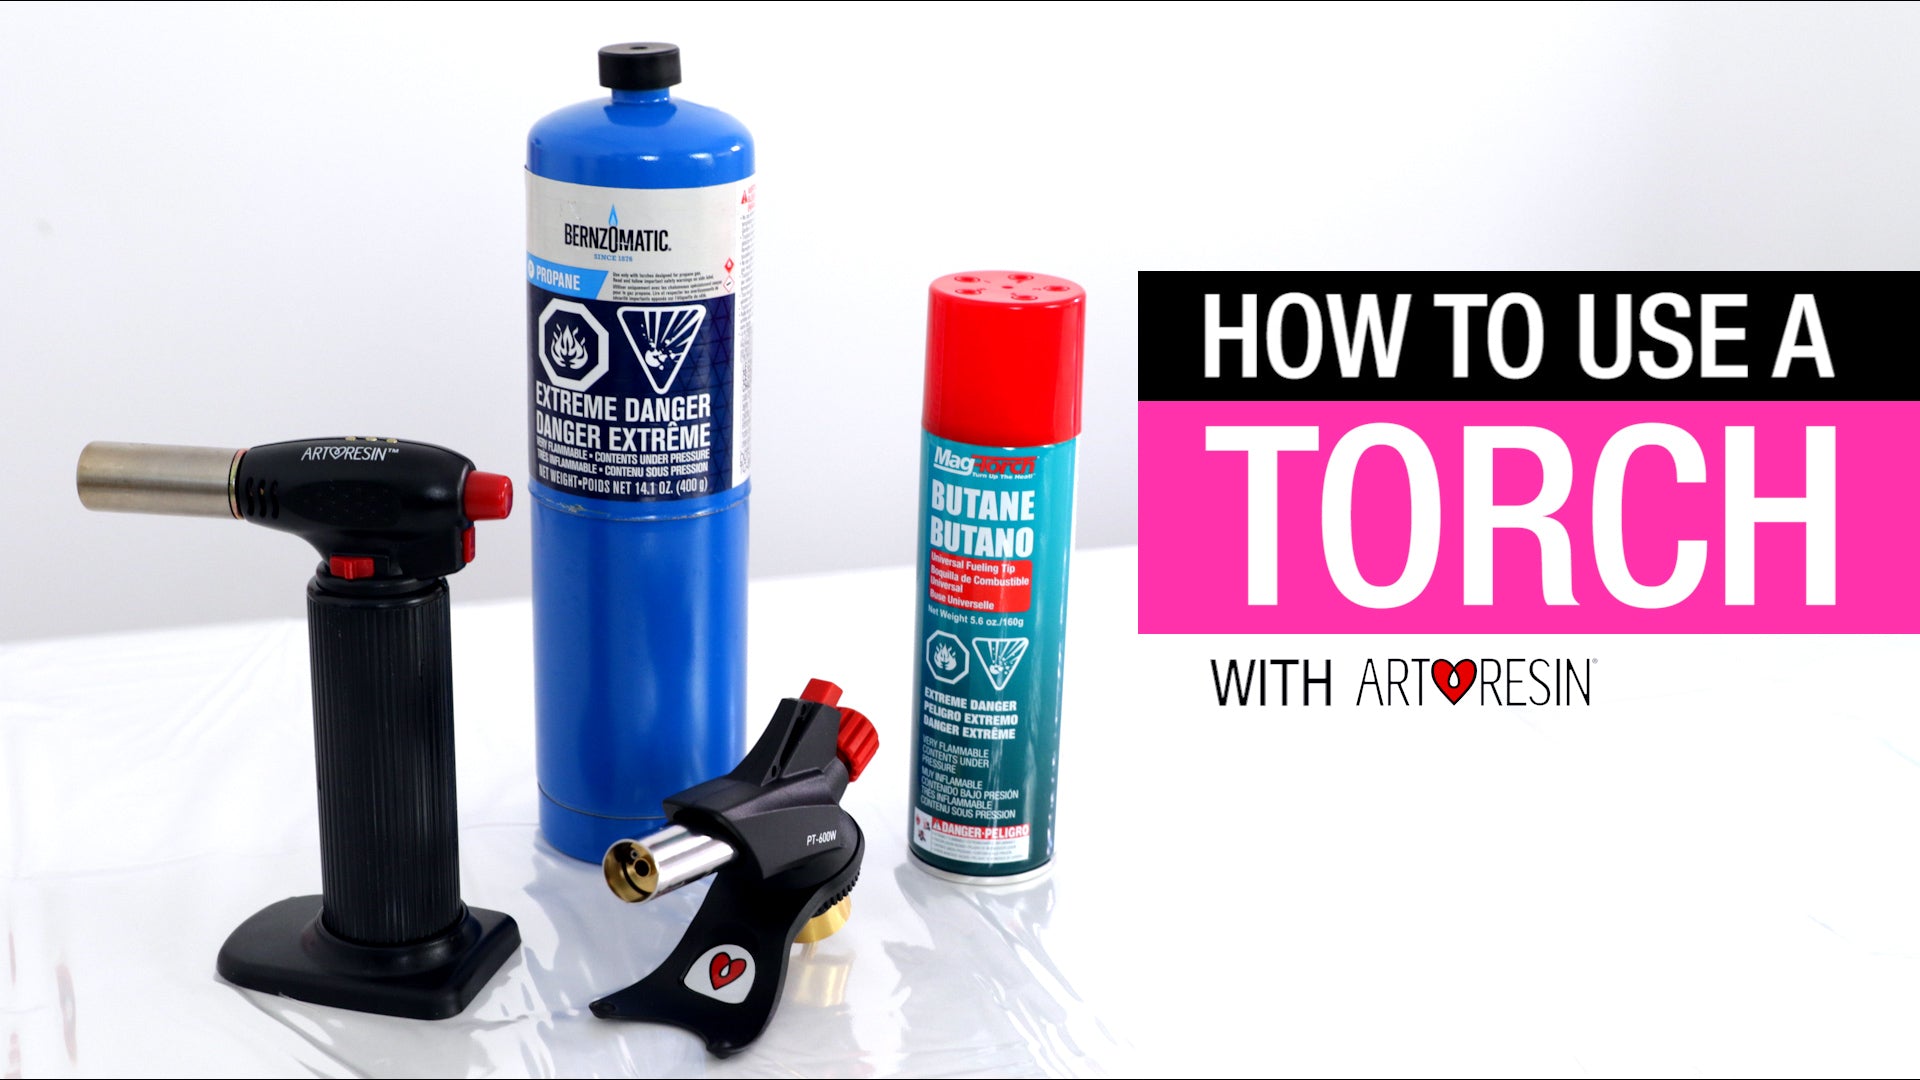 Why Use a Torch to Get Rid of Bubbles on Epoxy Resin? – ArtResin